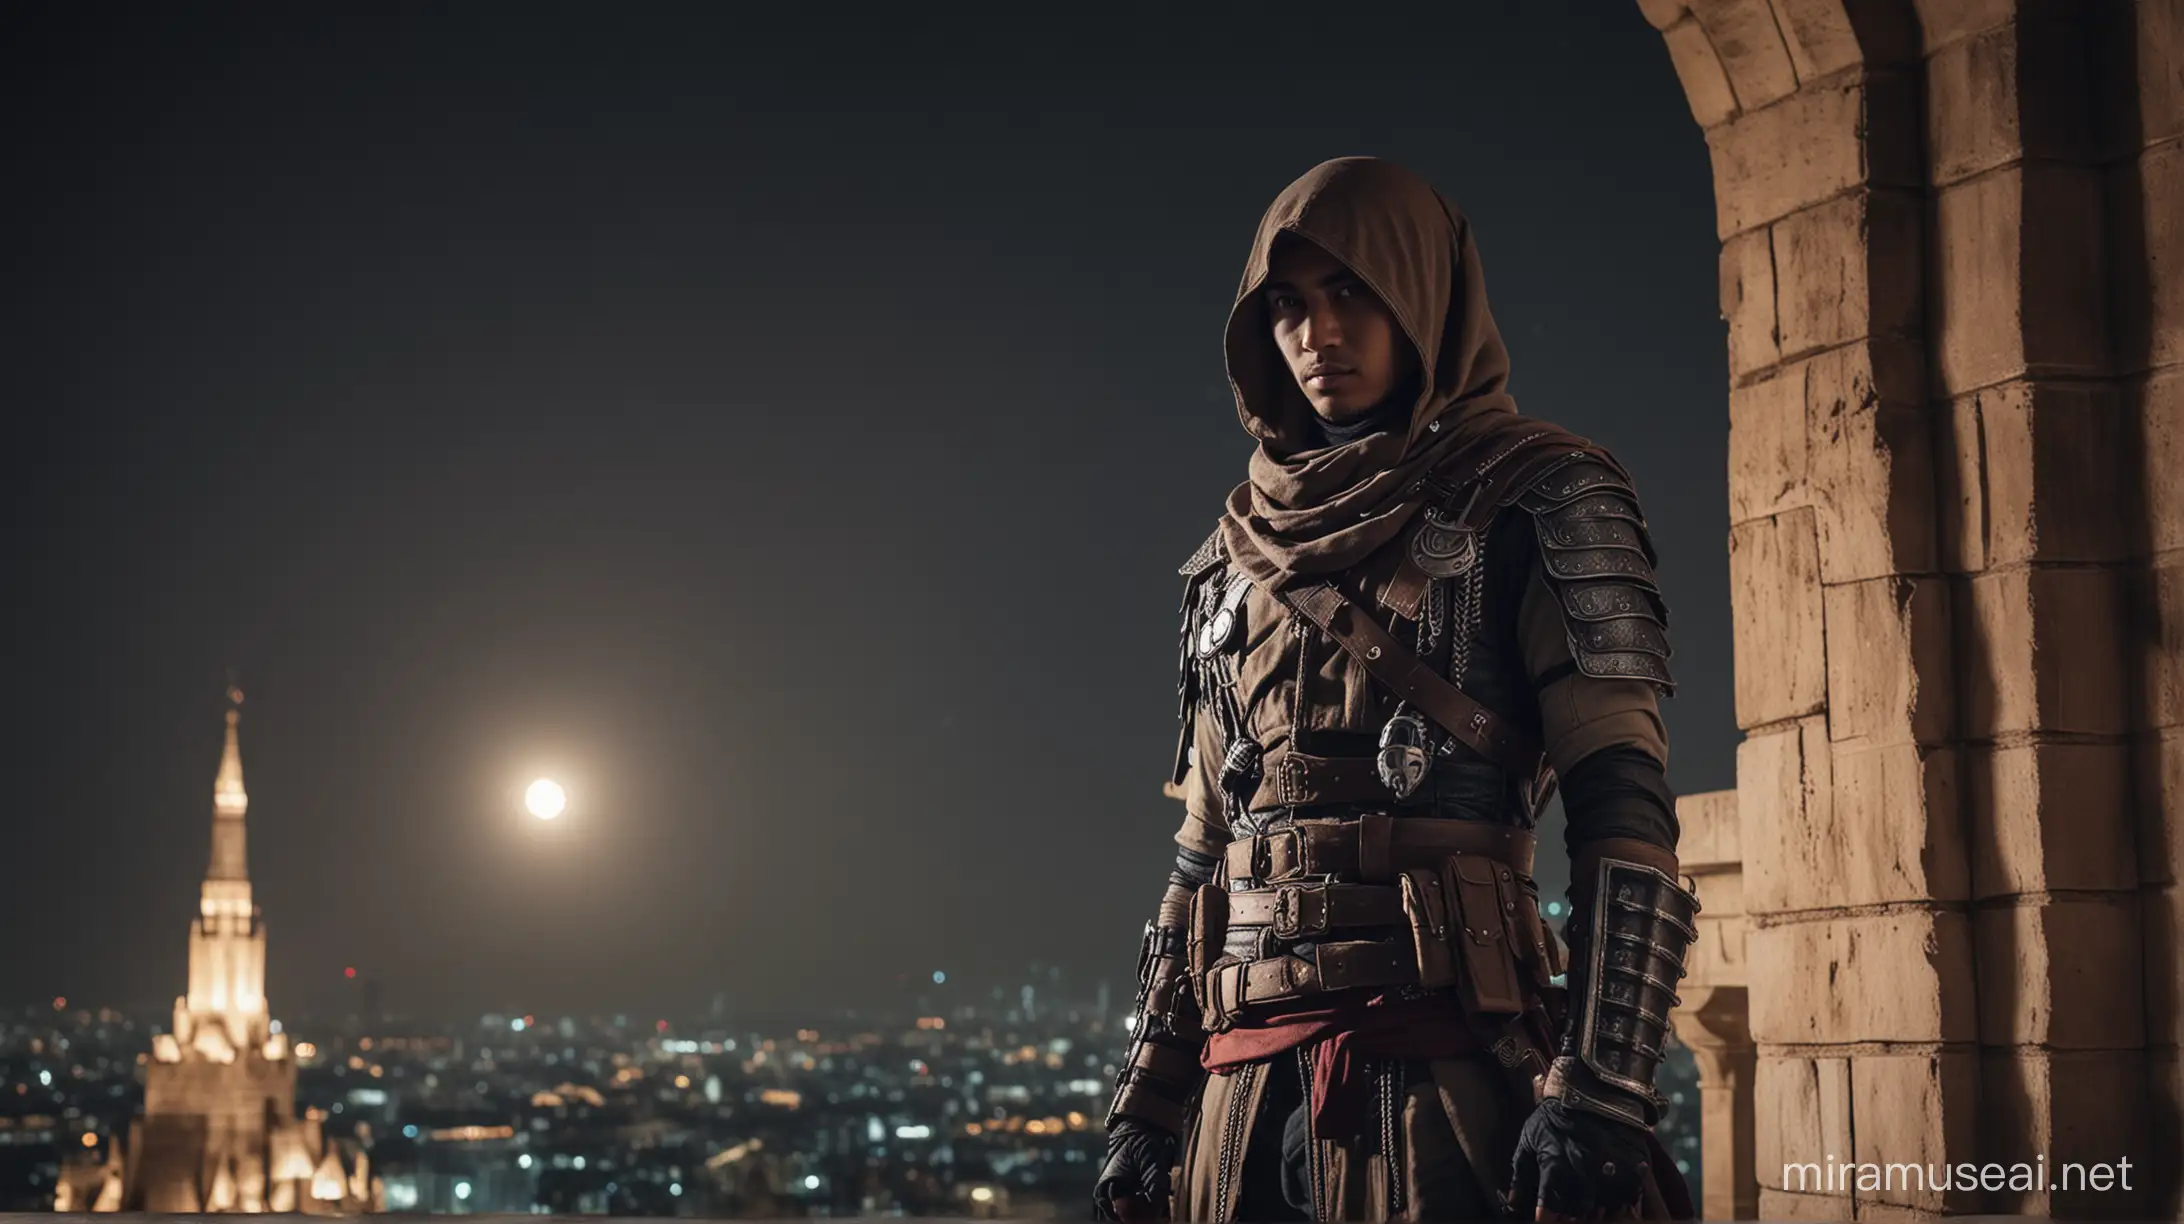 Young Indonesian Man Cosplaying as Arabian Muslim Assassin Commander on Royal Tower at Night